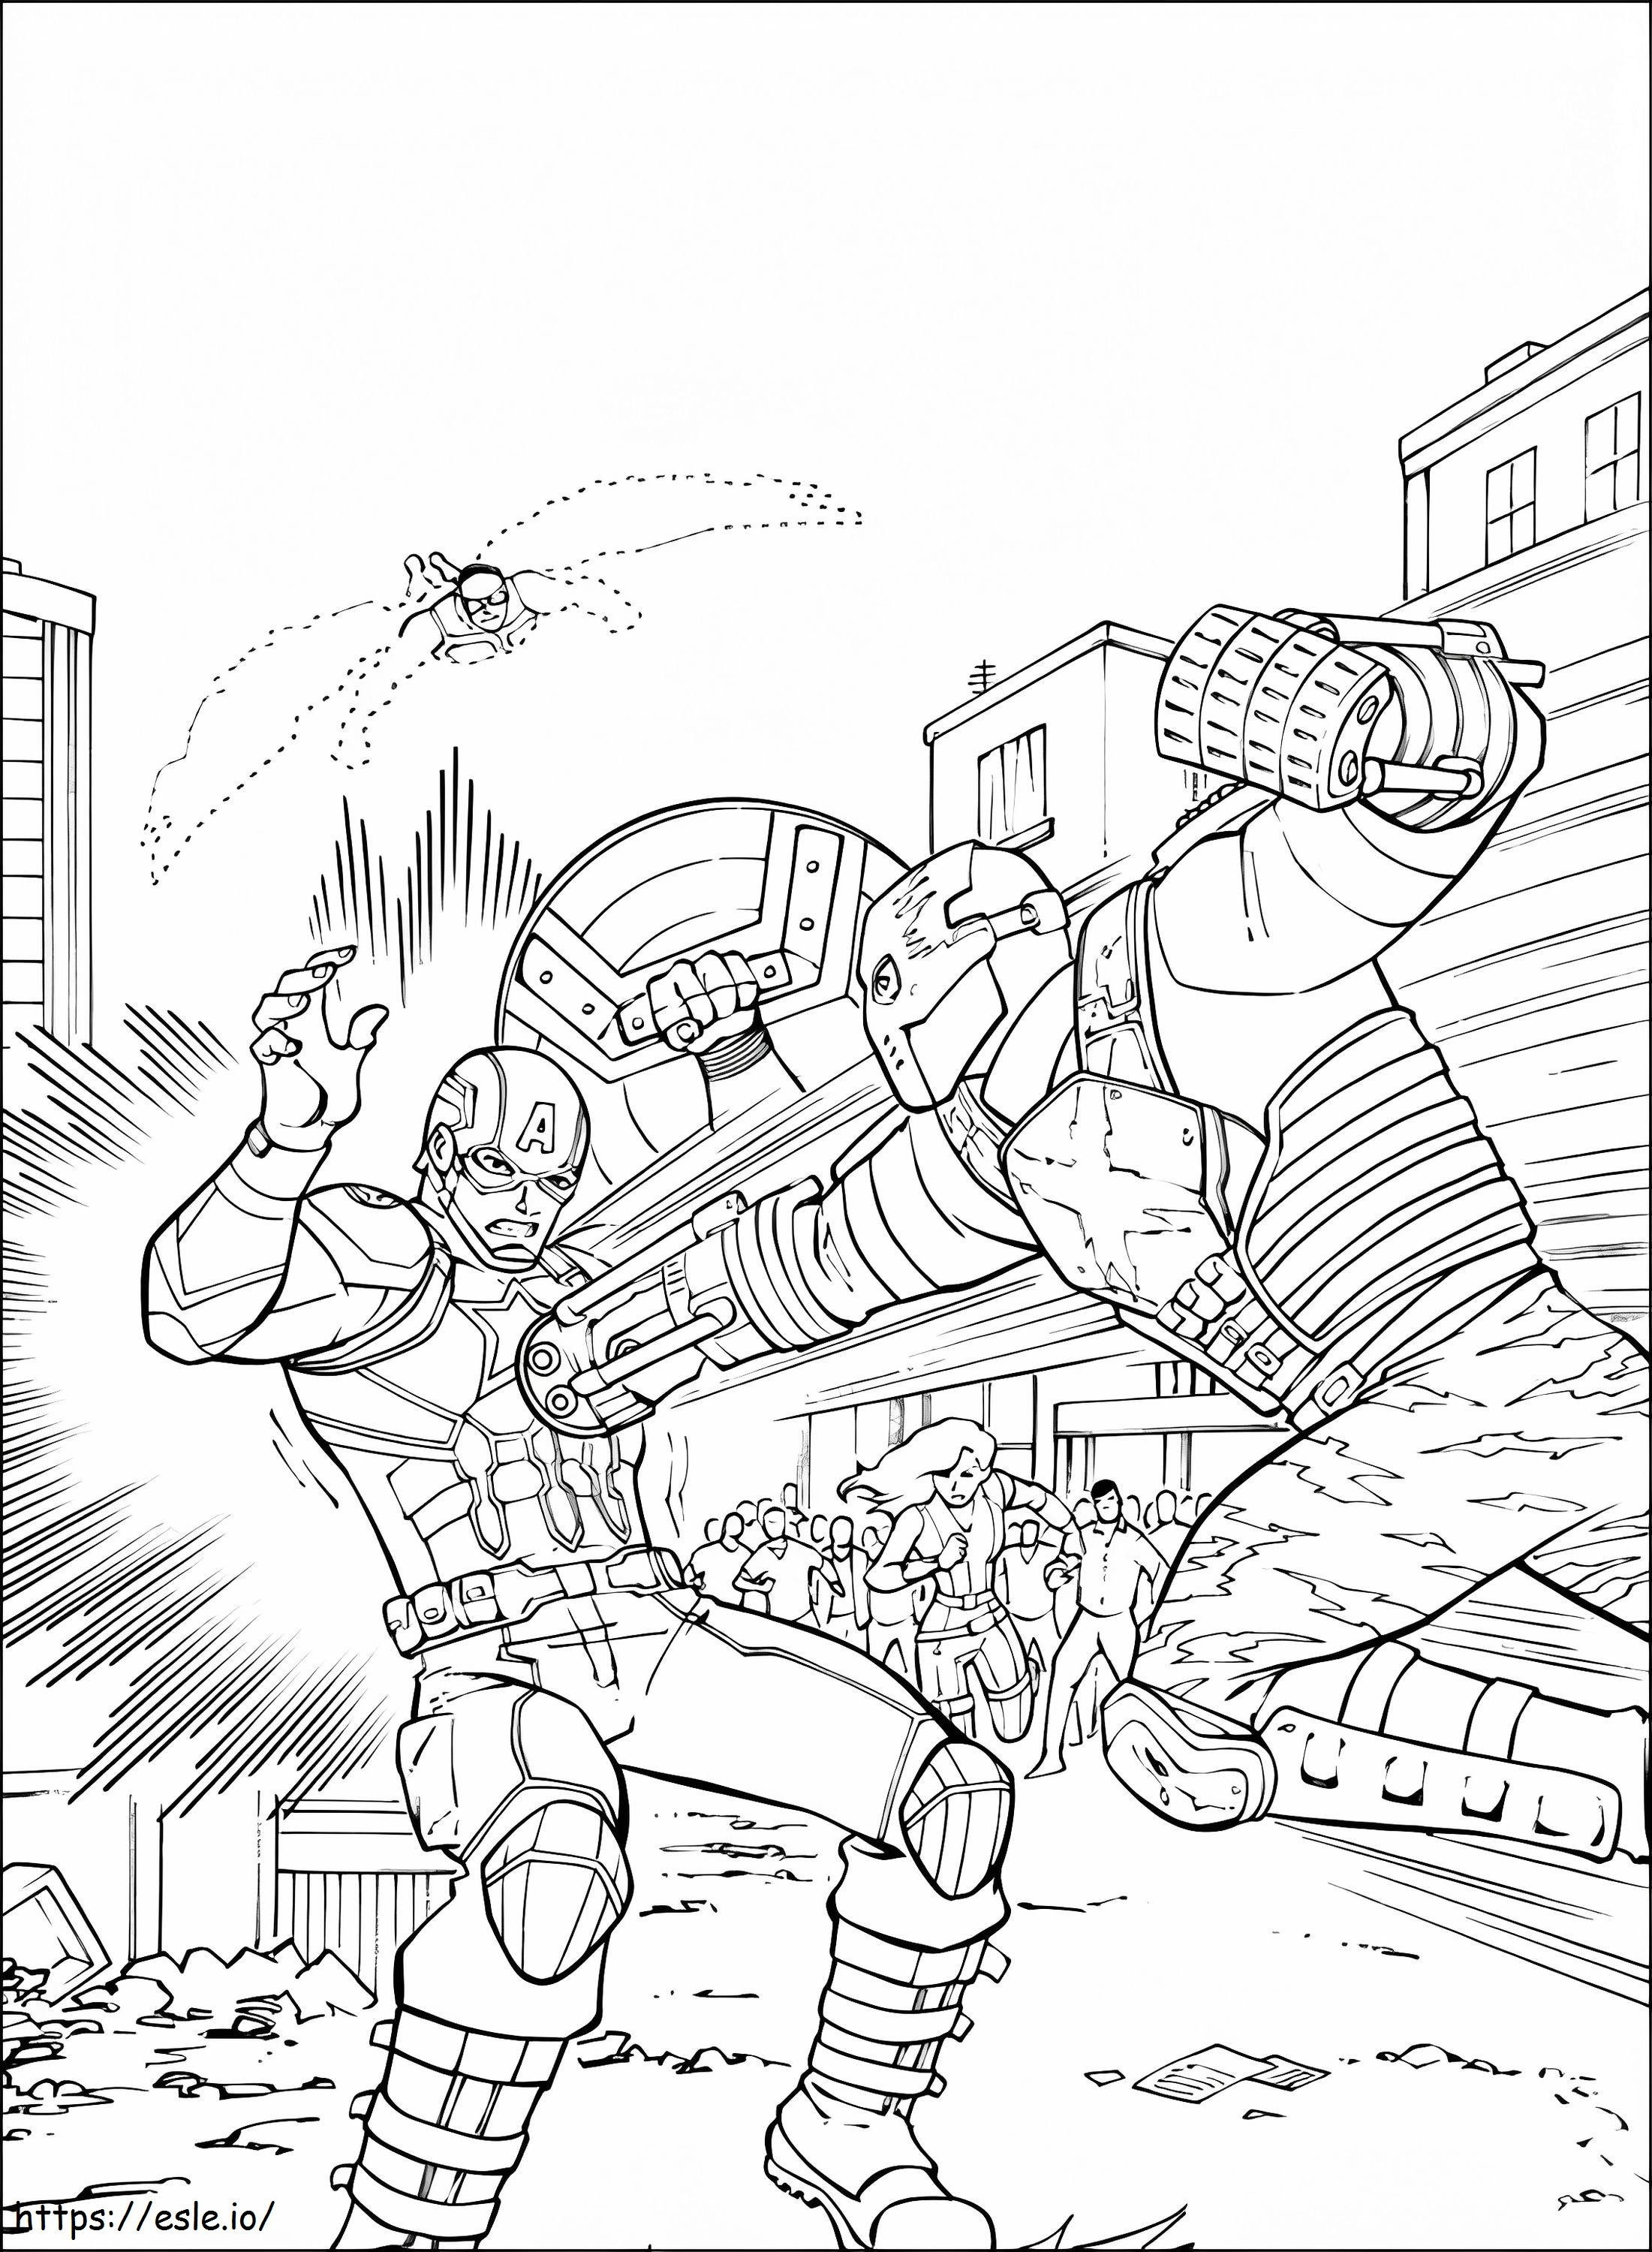 Captain America Fighting With Bucky A4 coloring page